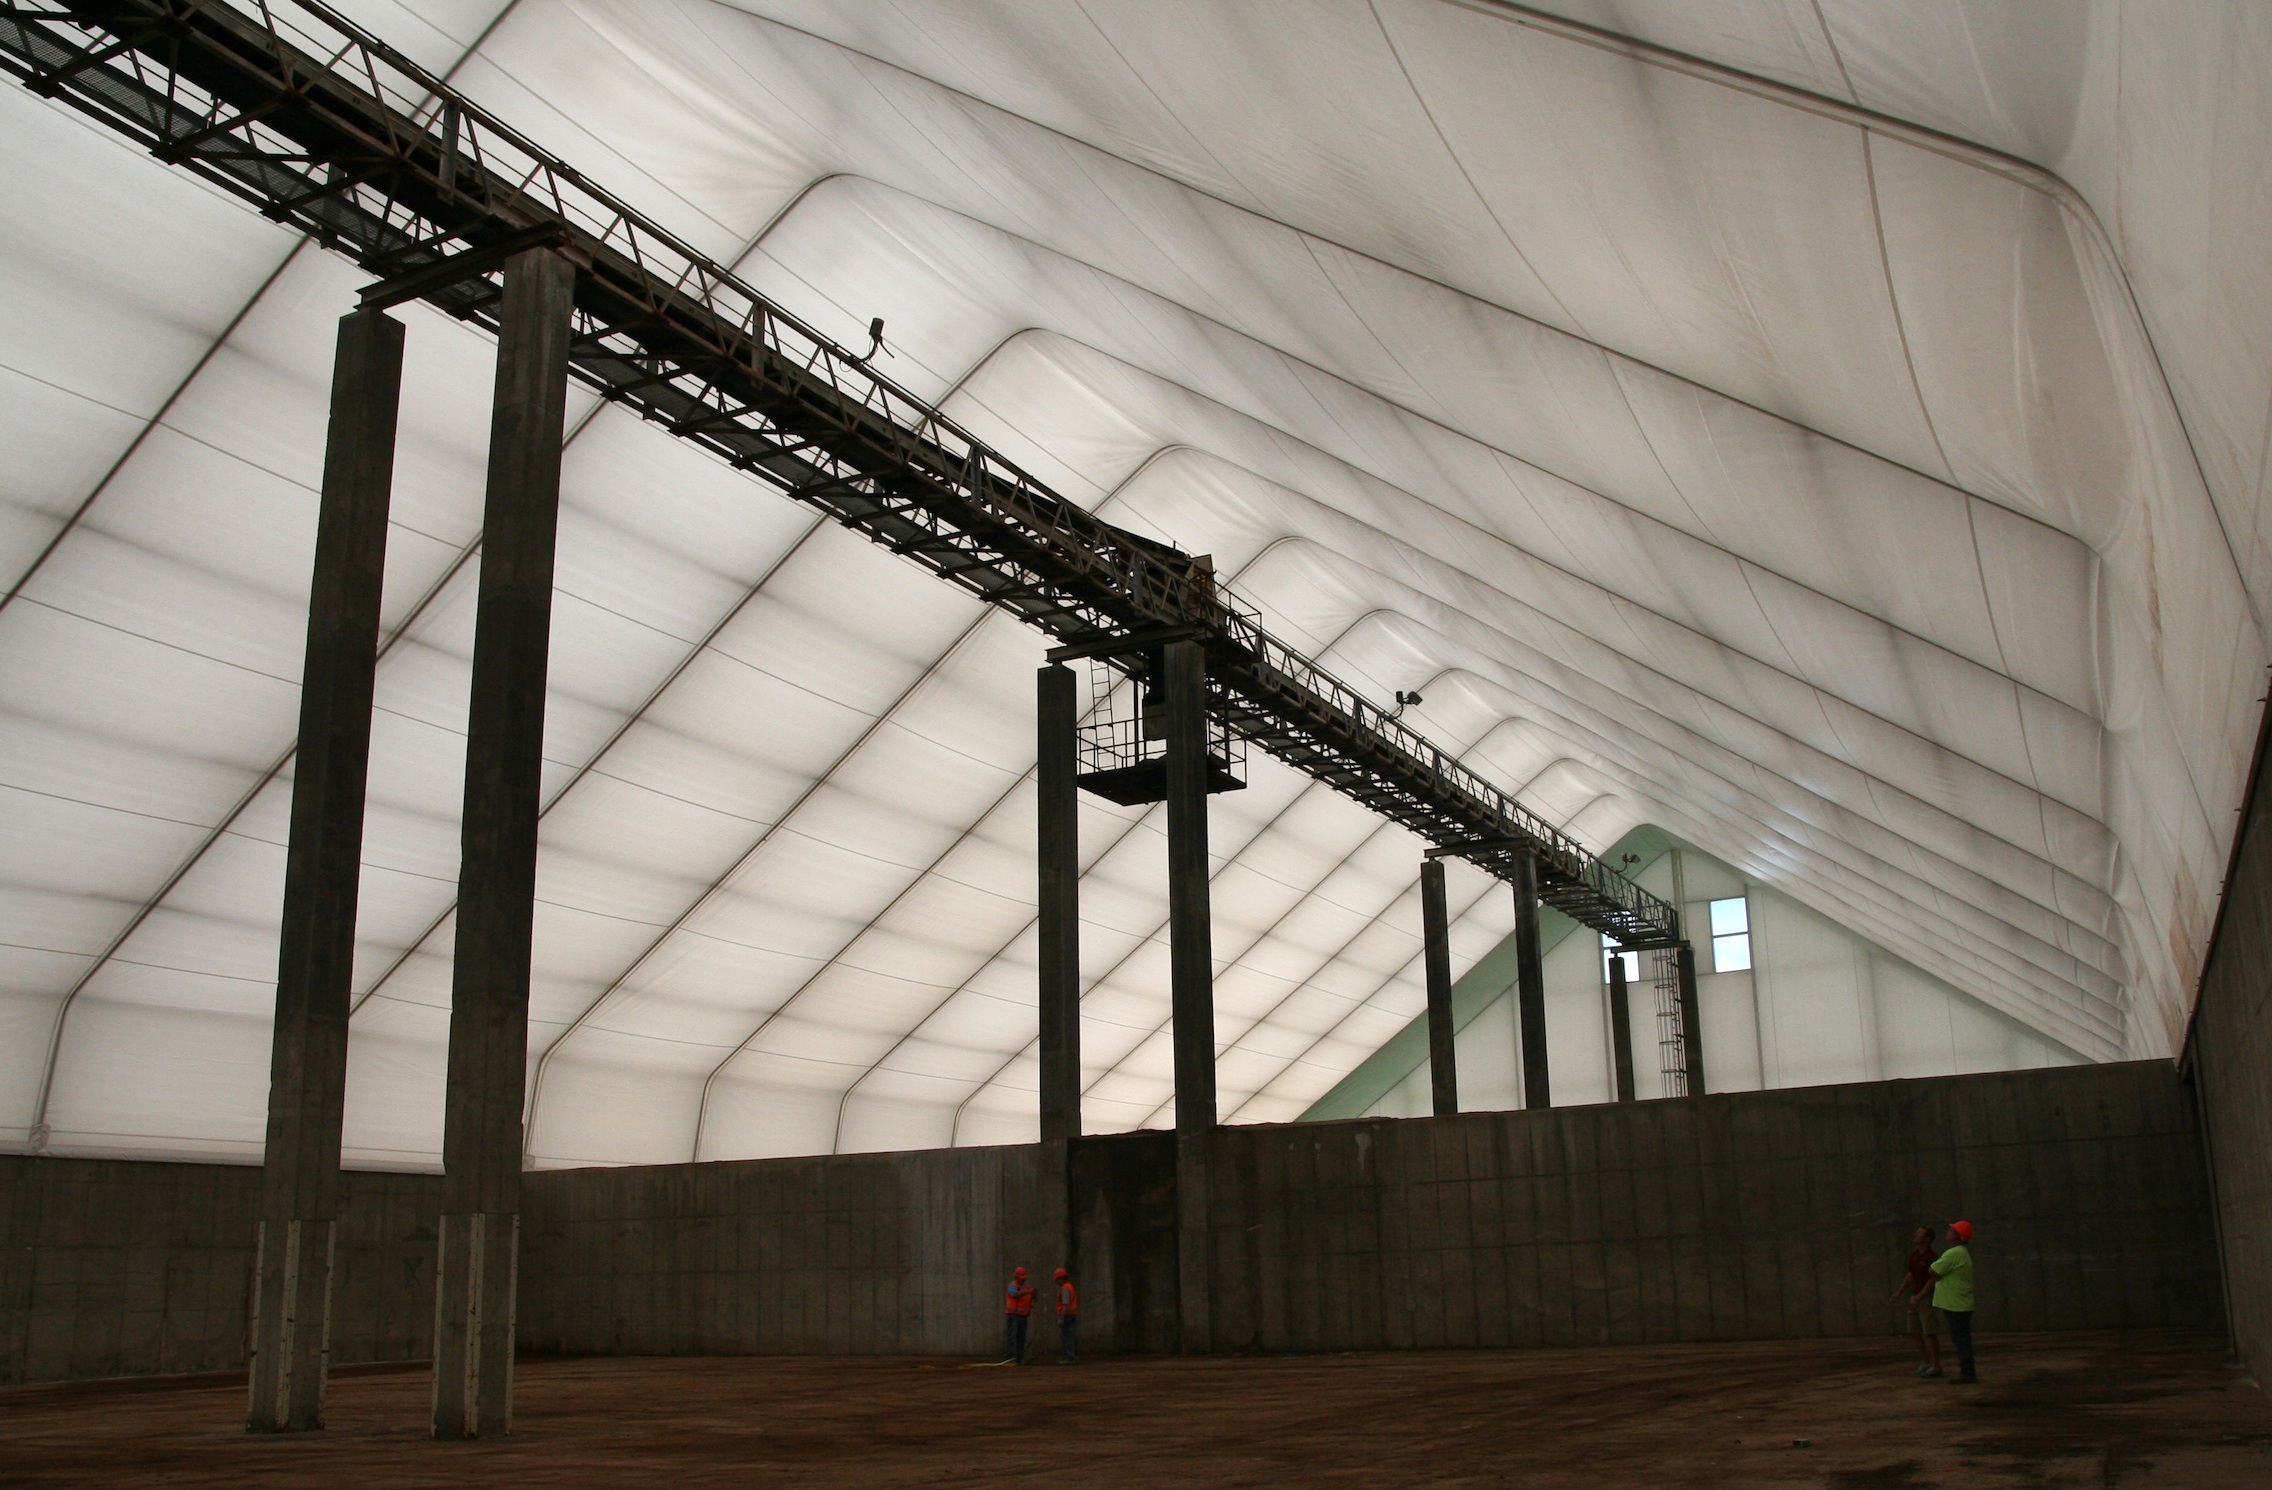 Inside shot of new Legacy tension fabric structure for Ag Partners, LLC in Albert City, Iowa.